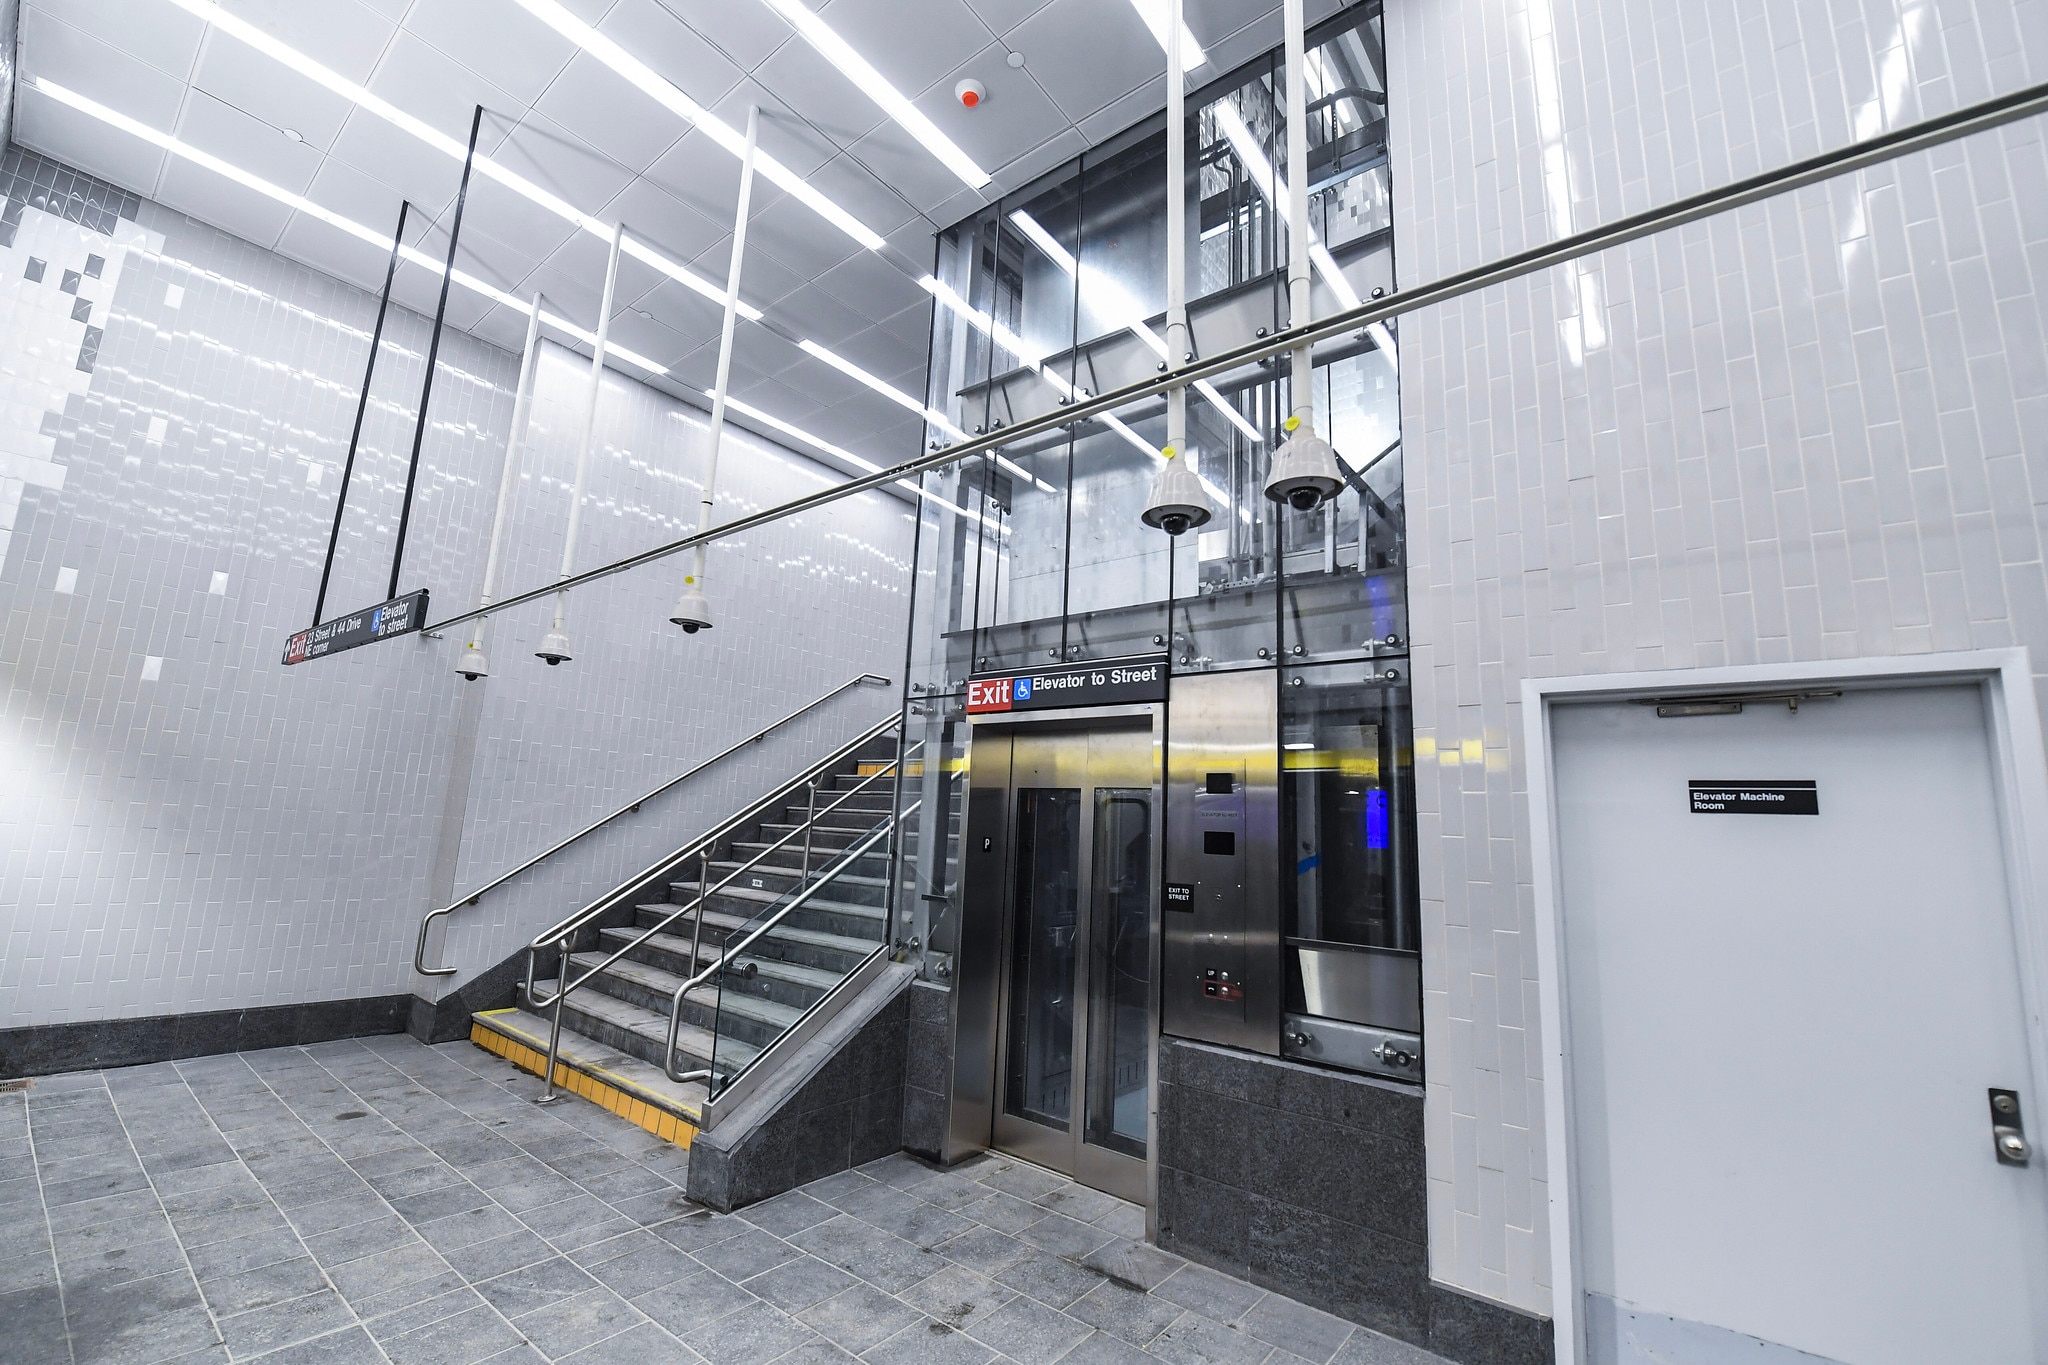 accessibility improvements at the court square station